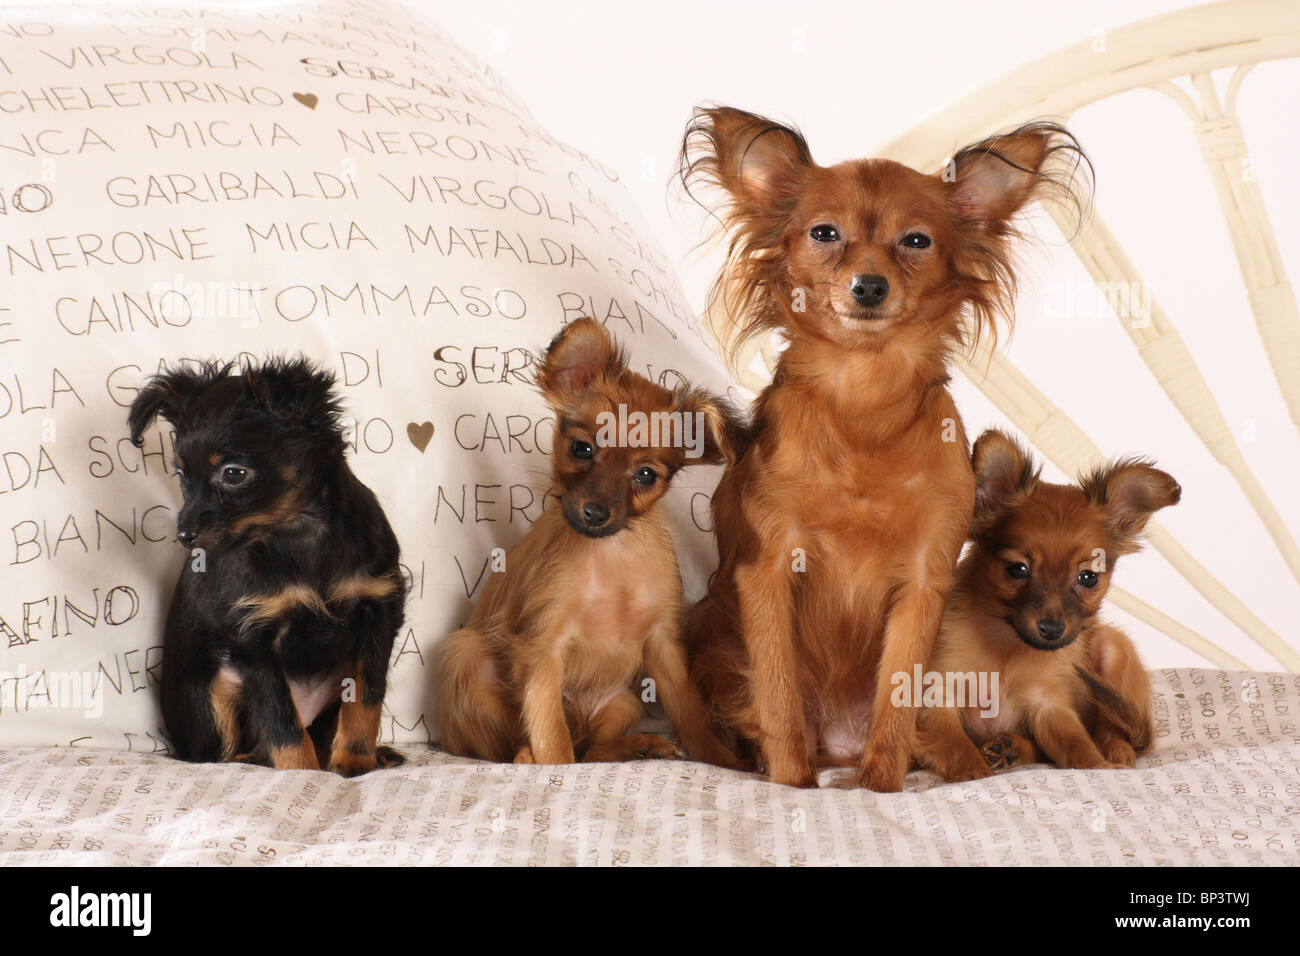 Russian Toy Terrier dog with three puppies on a bed Stock Photo